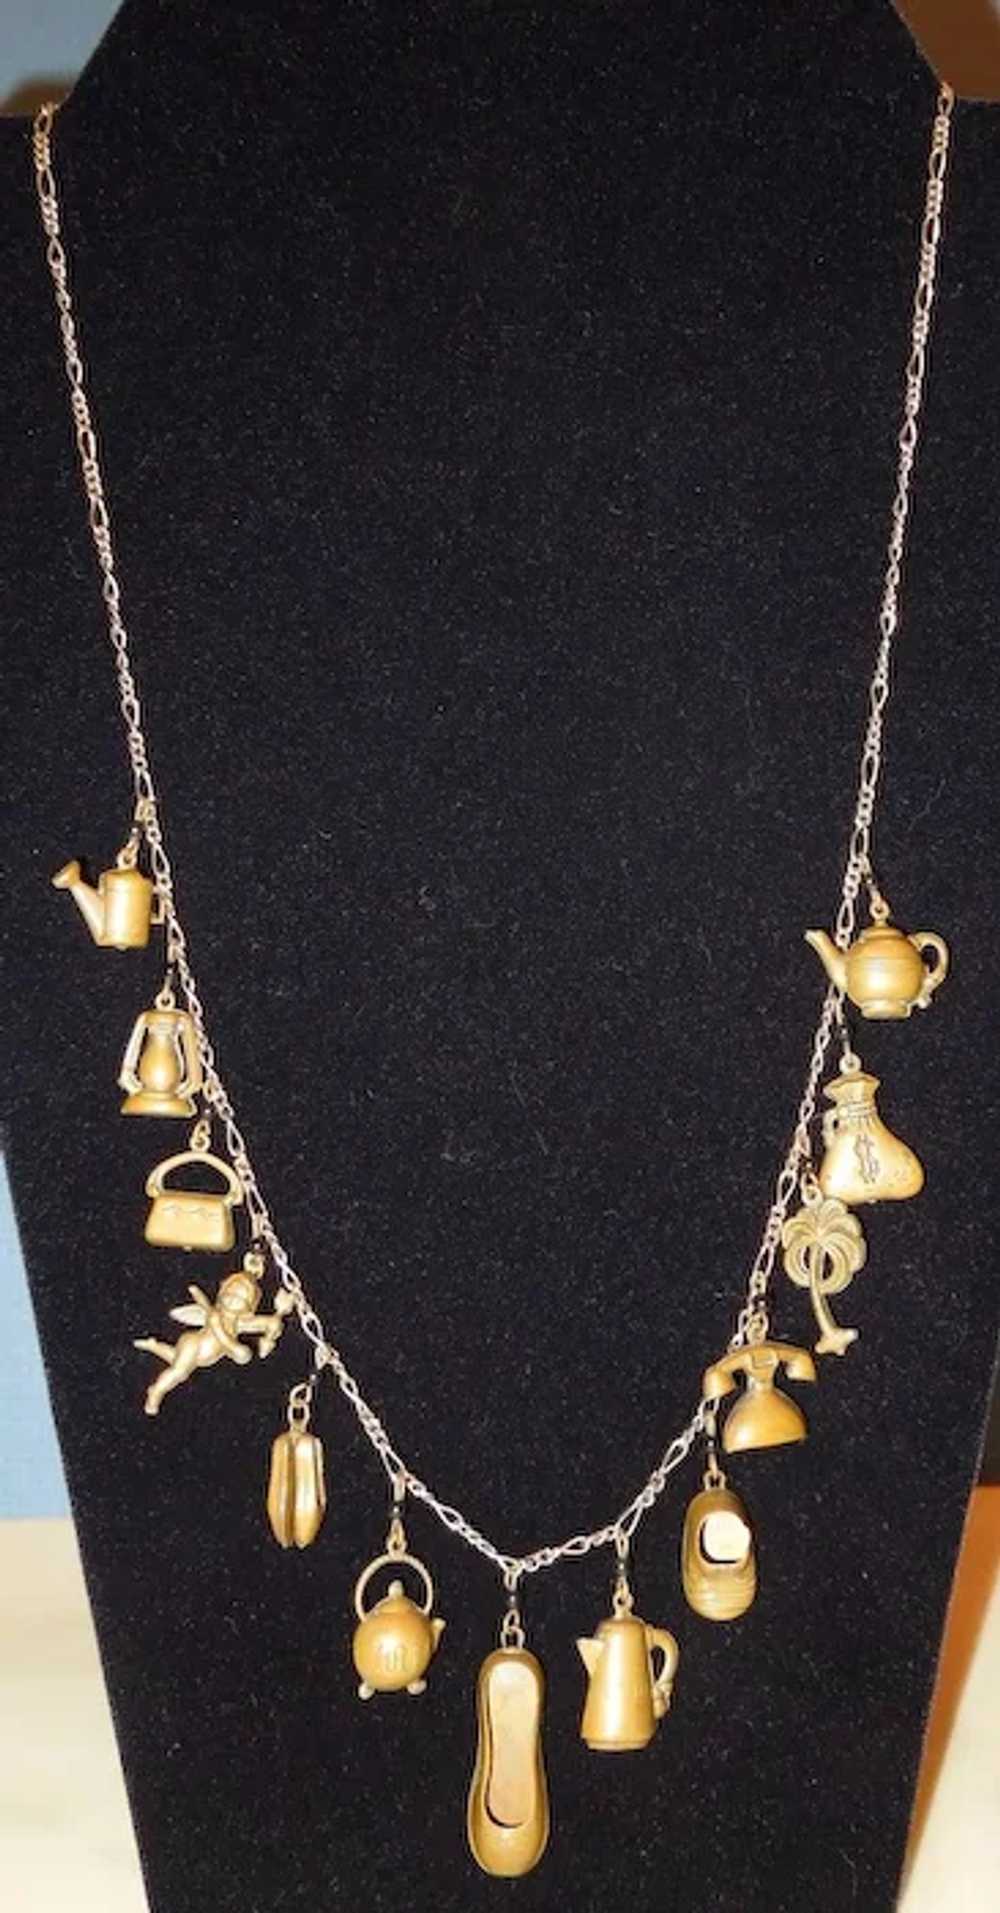 1920's-30's Brass Charm Necklace - image 2